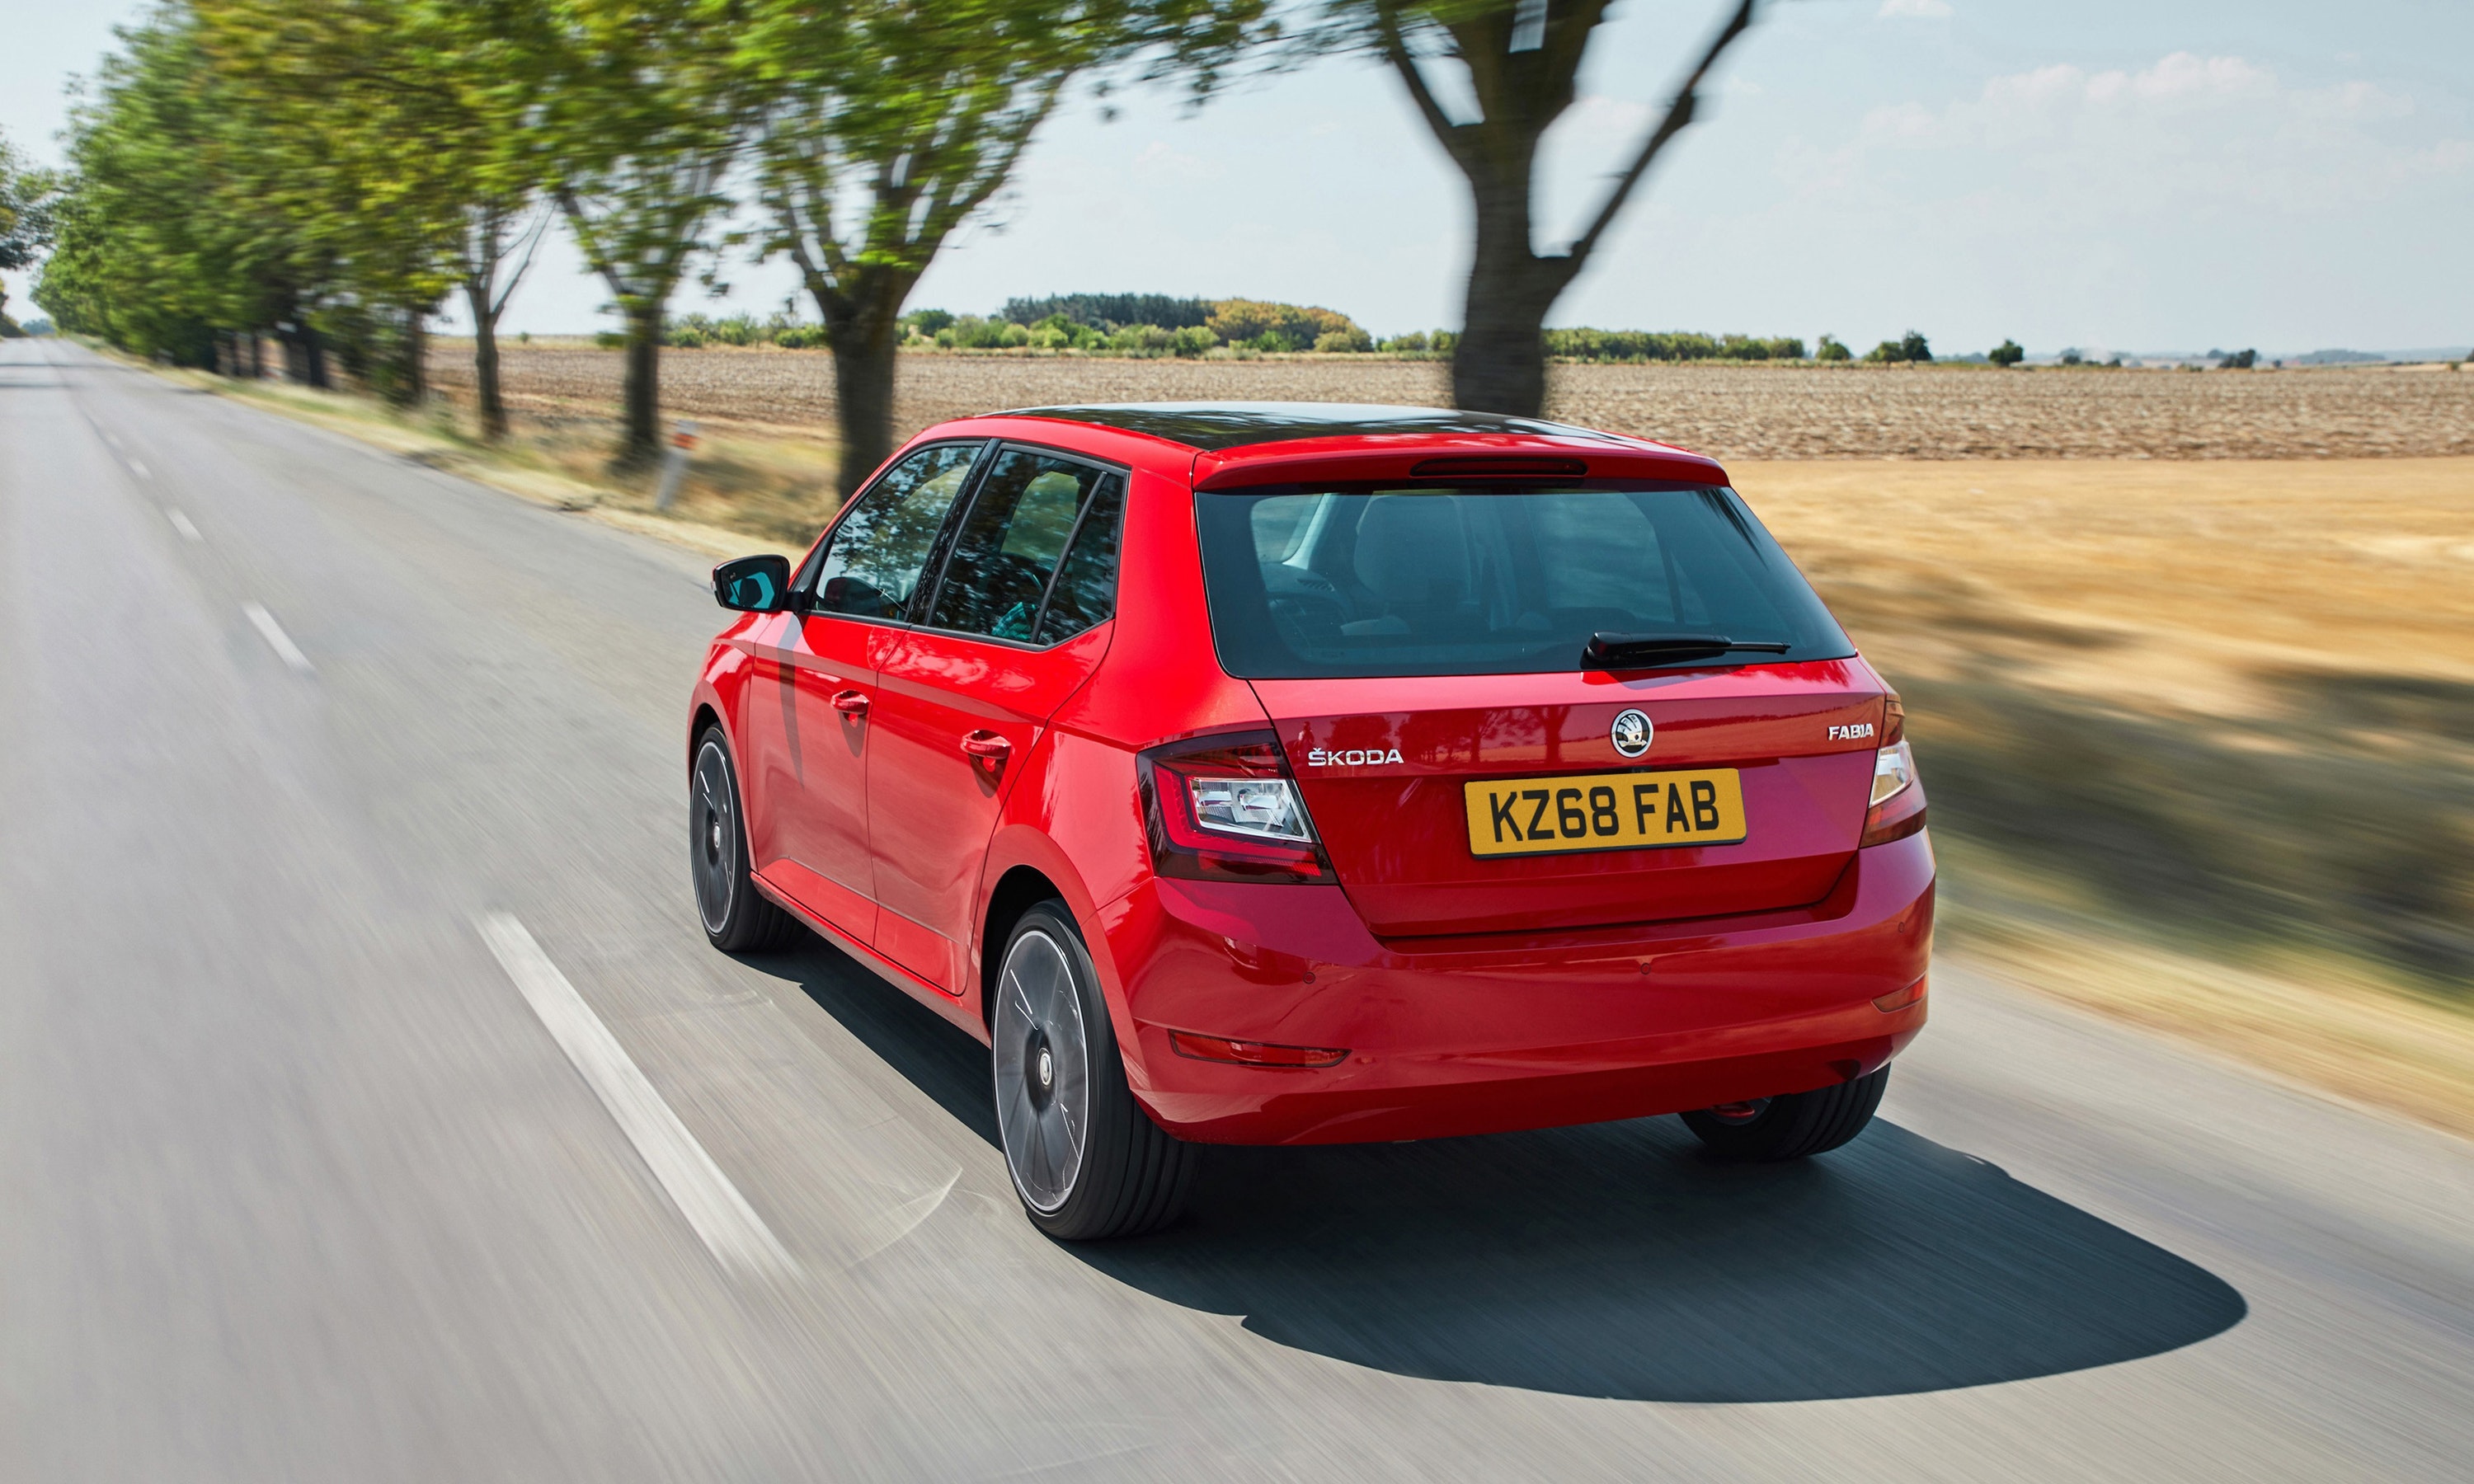 Rear view of a red Skoda Fabia driving on a road